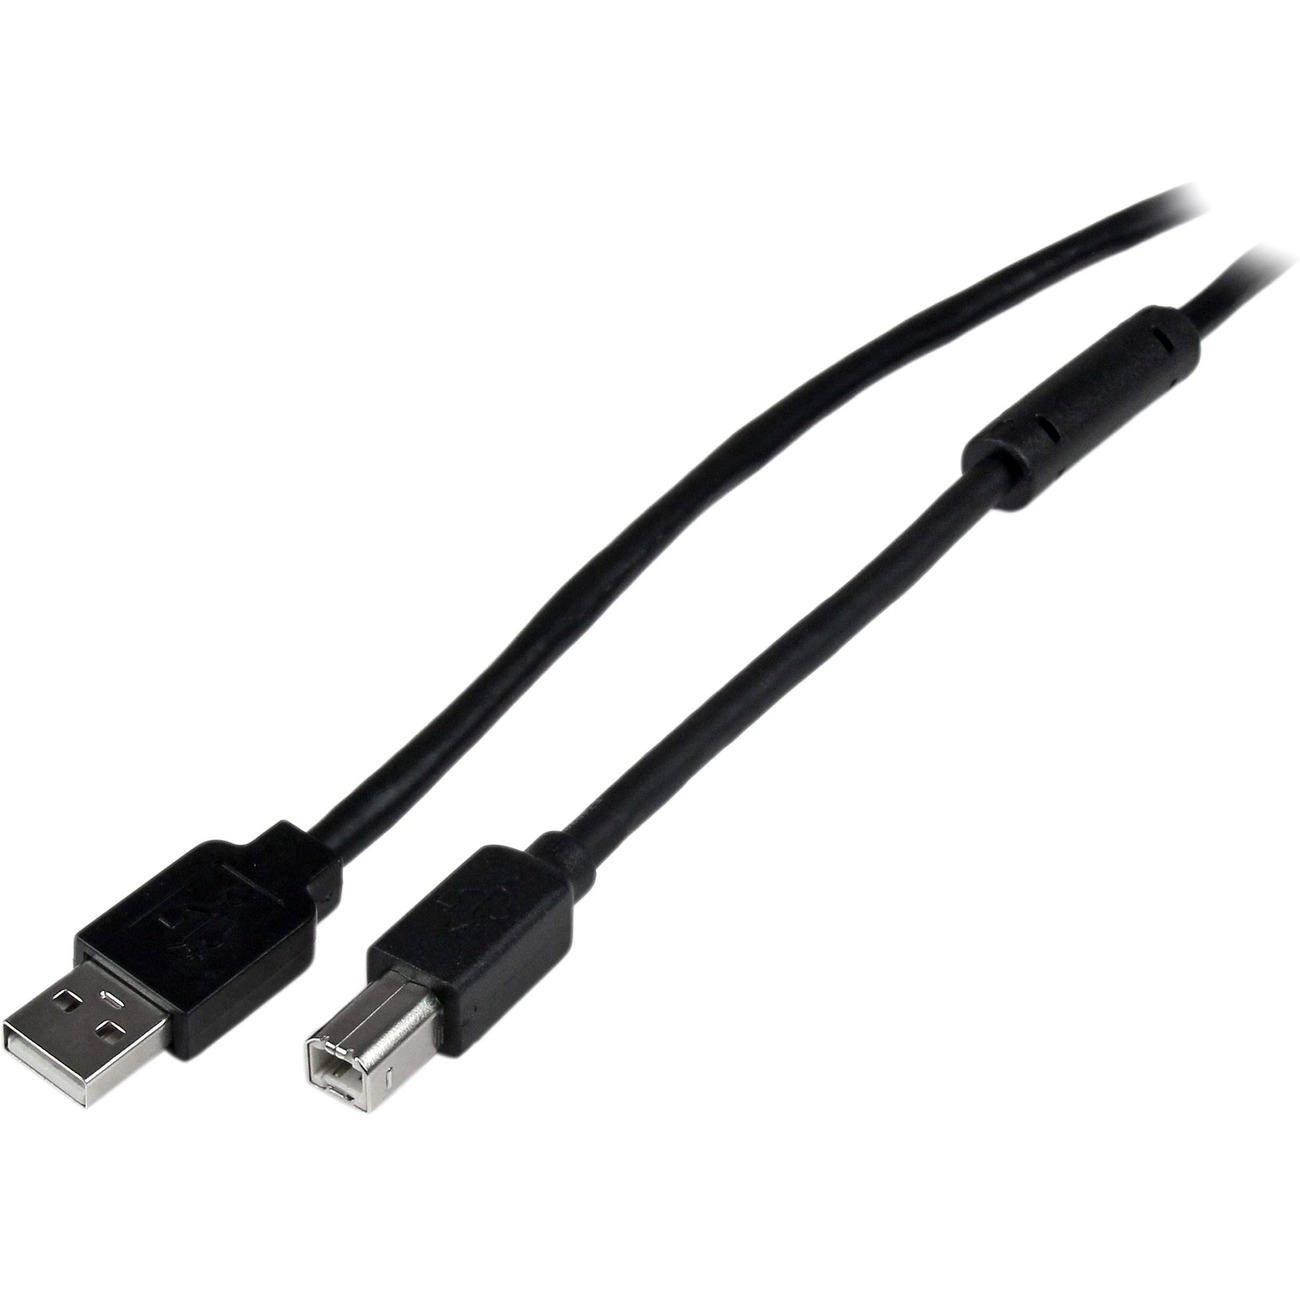 Vermomd artillerie palm STCUSB2HAB65AC - StarTech.com 20m / 65 ft Active USB 2.0 A to B Cable - M/M  - Extend the distance between your USB 2.0 devices by up to 65ft - USB A B